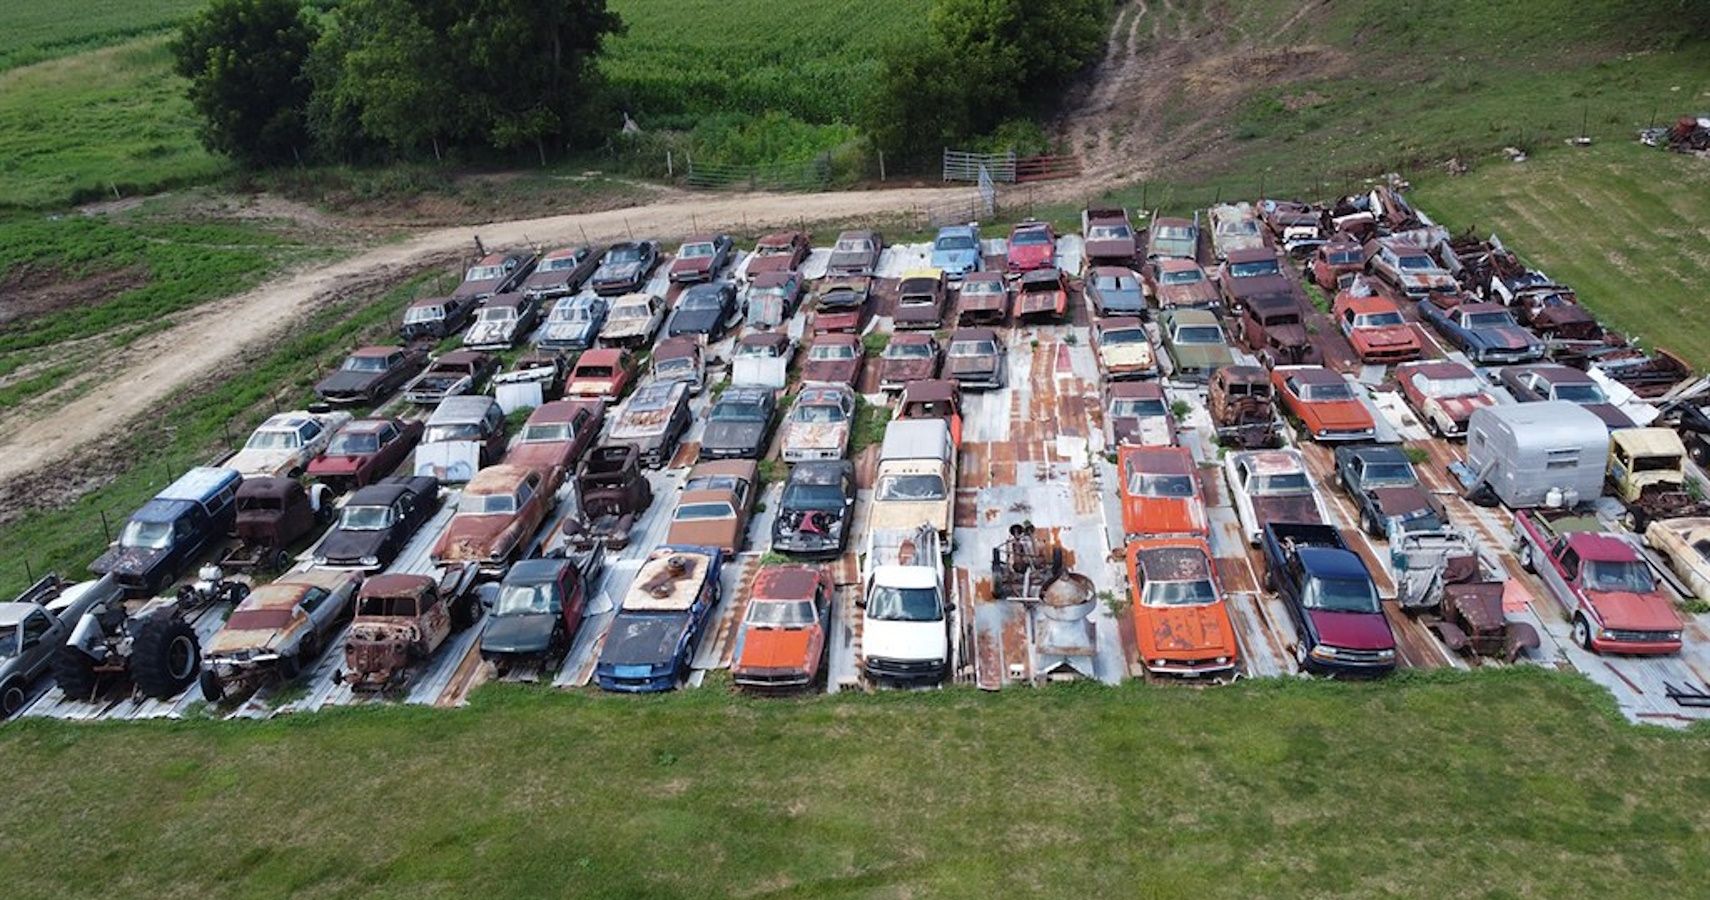 This classic car graveyard includes more than 40 Chevrolets for sale